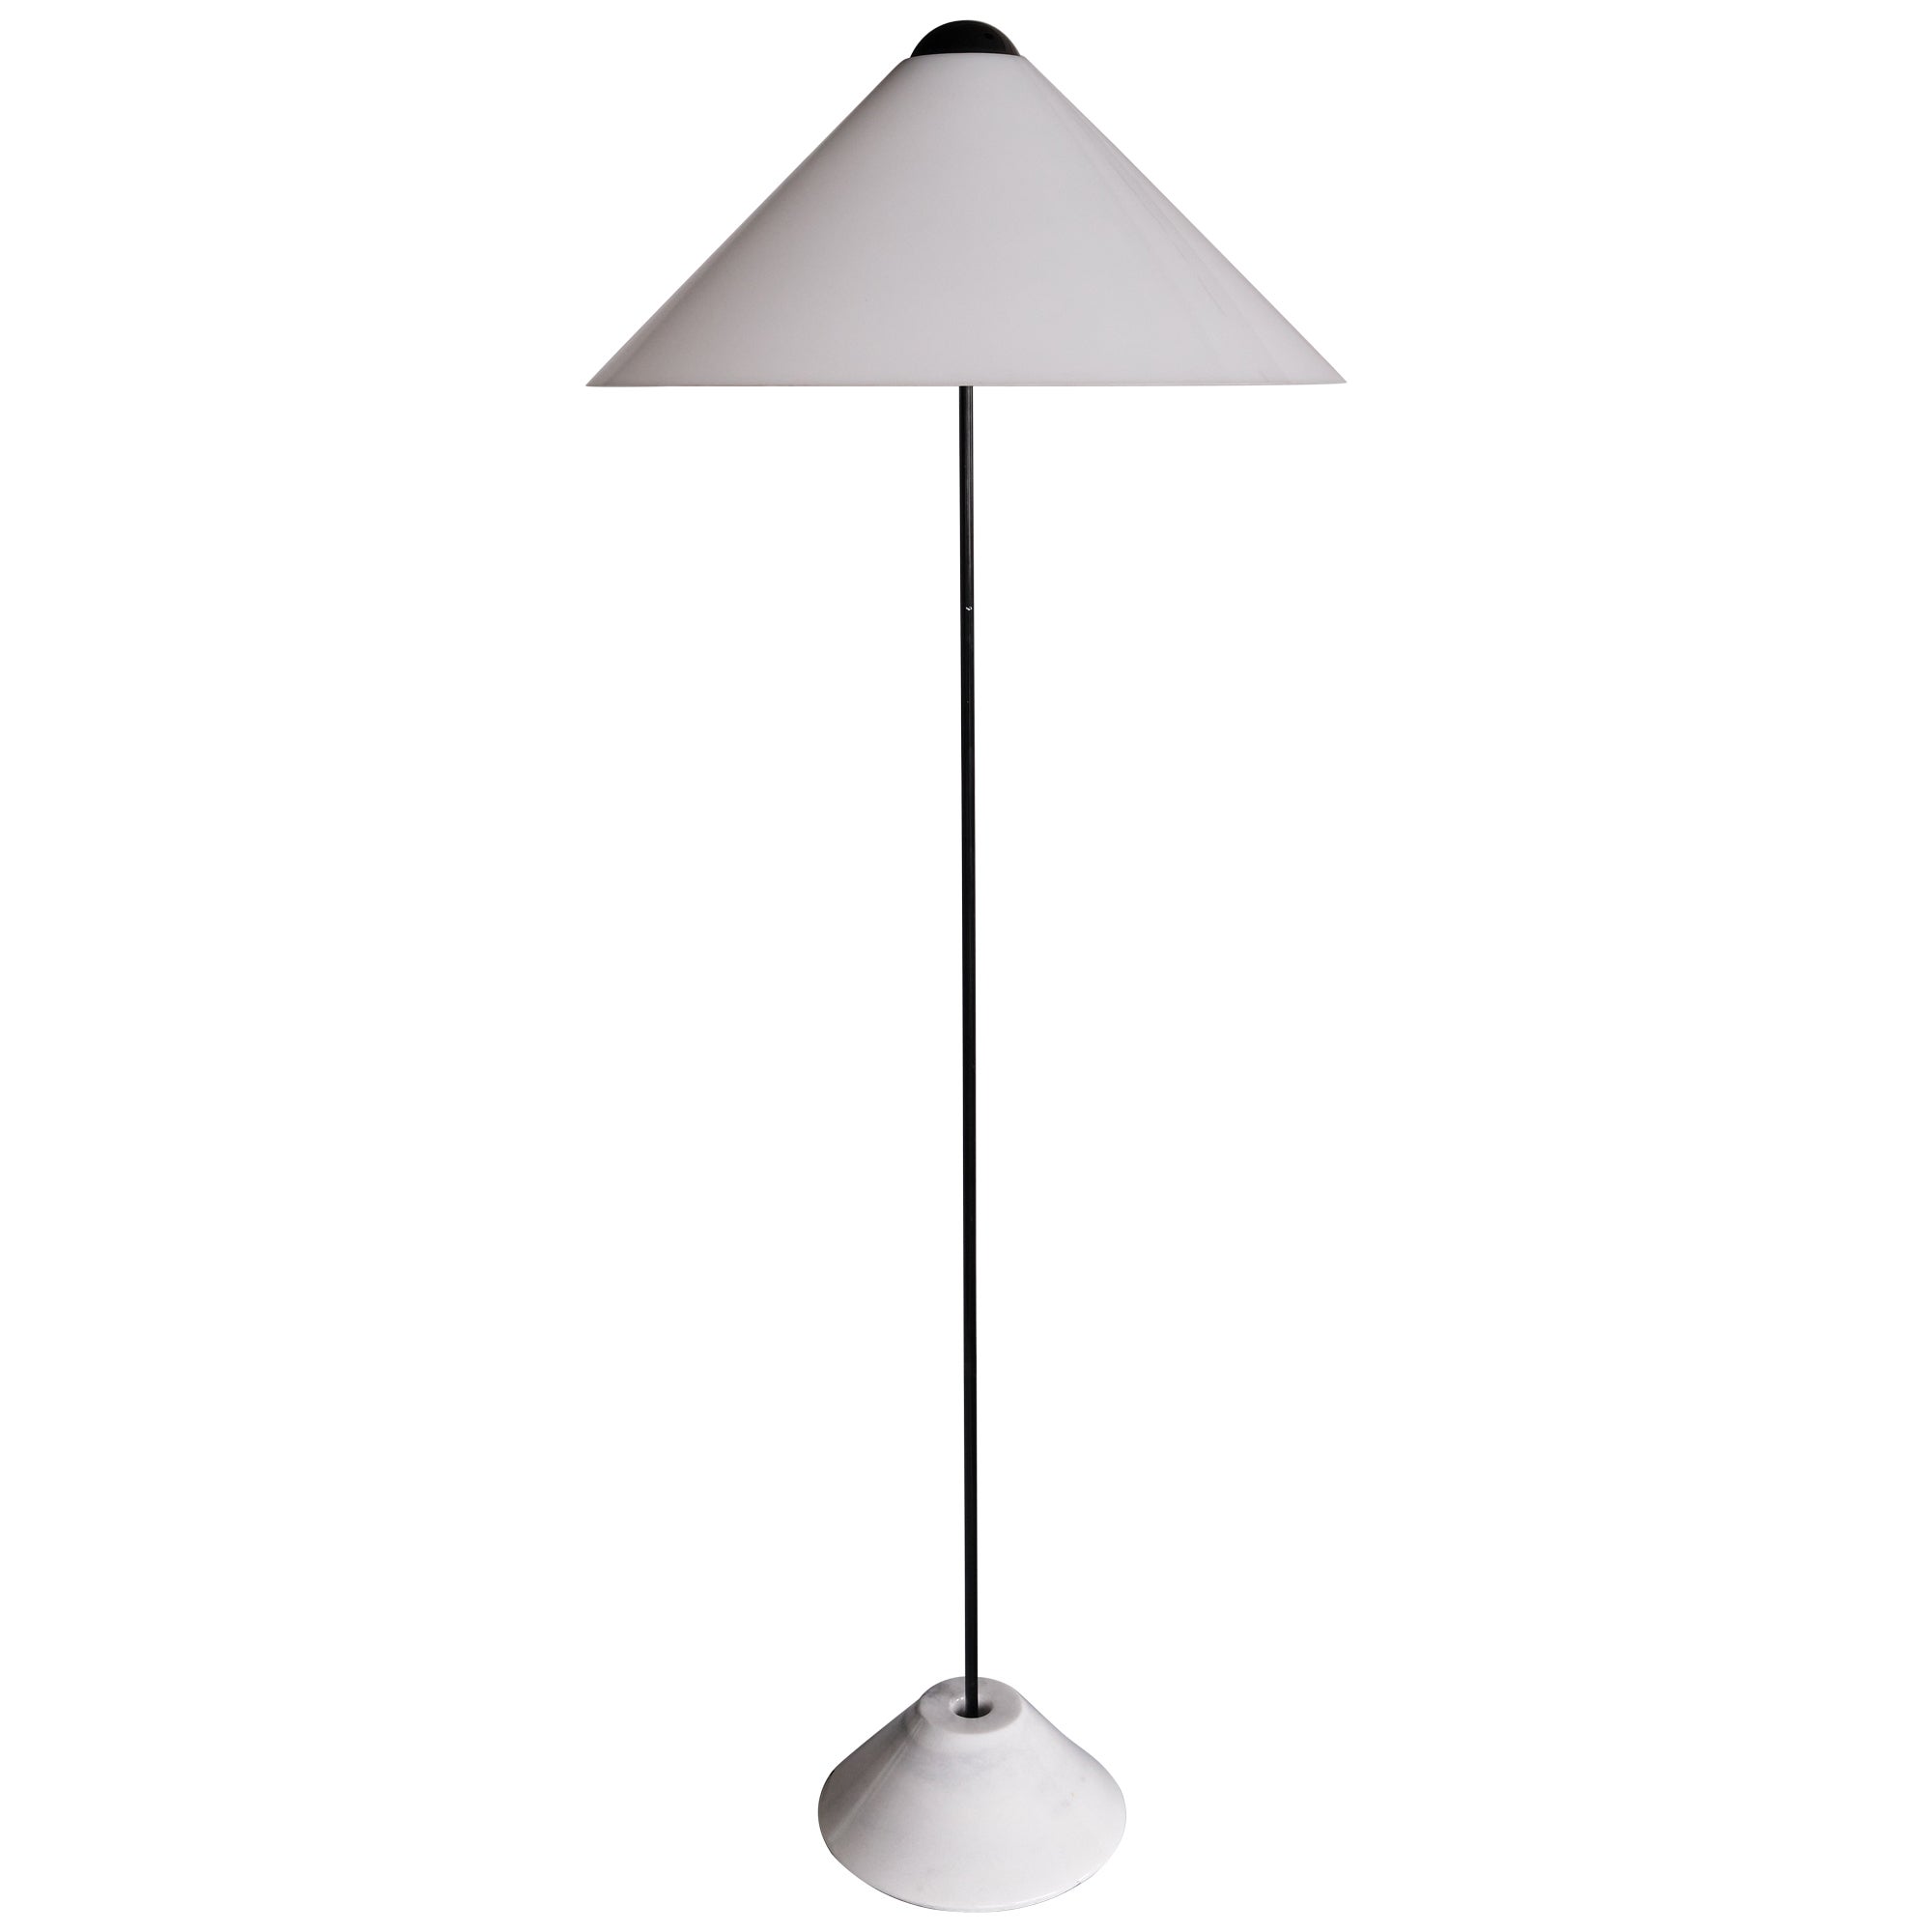 Vico Magistretti 'Snow' Floor Lamp in Metal and Marble, Oluce, Italy, 1973 For Sale